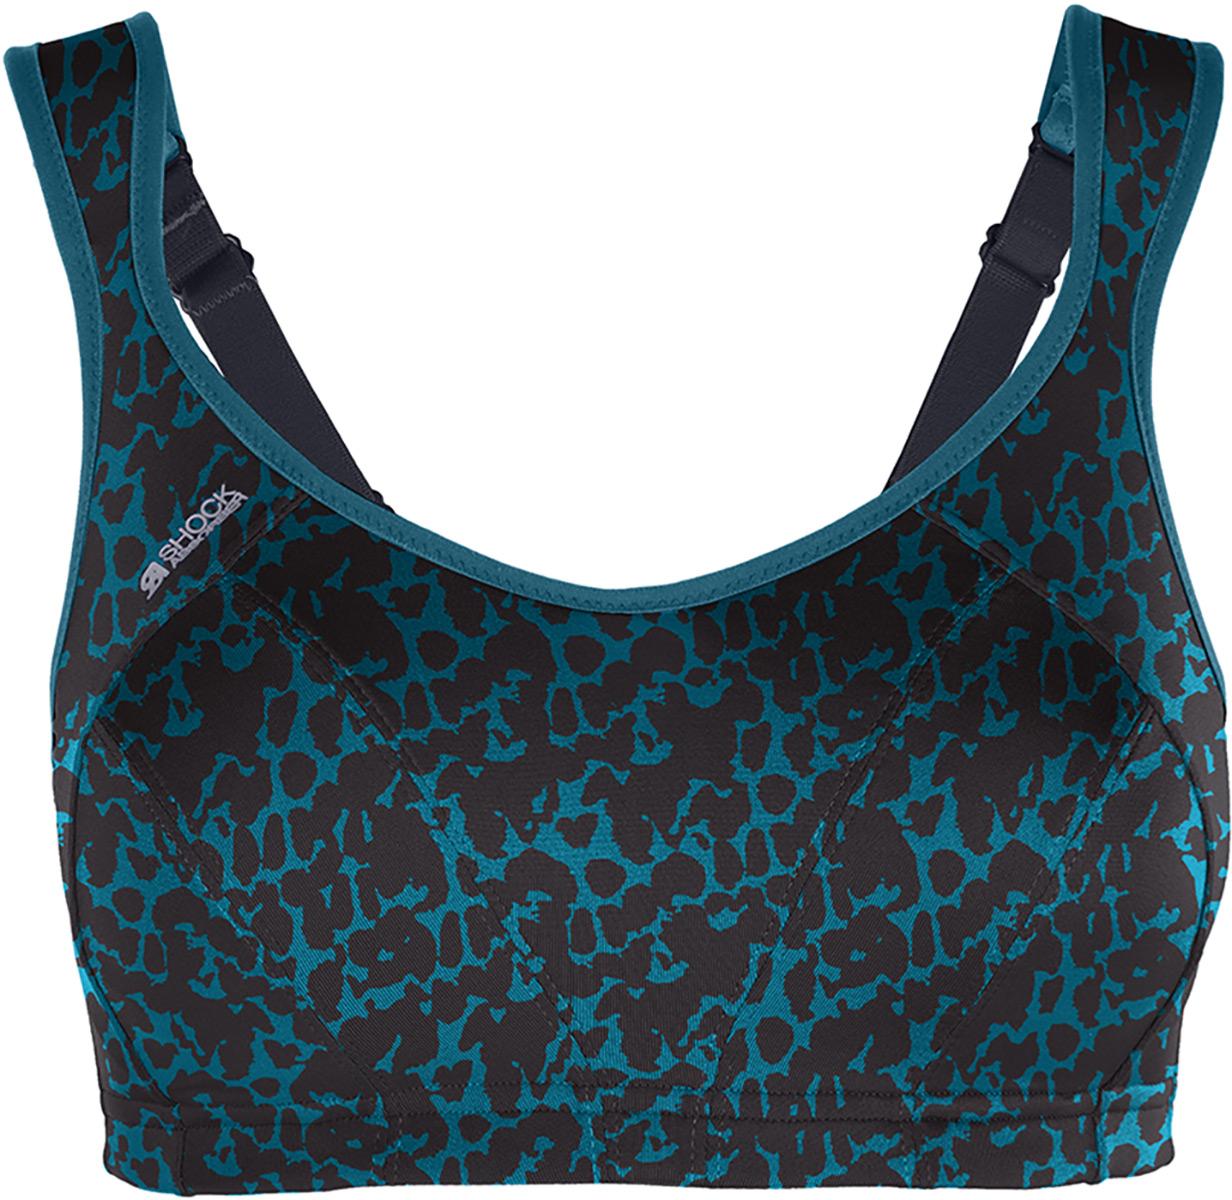 Image of Shock Absorber Active Multi Sports Support Sports Bra - Leopard Print